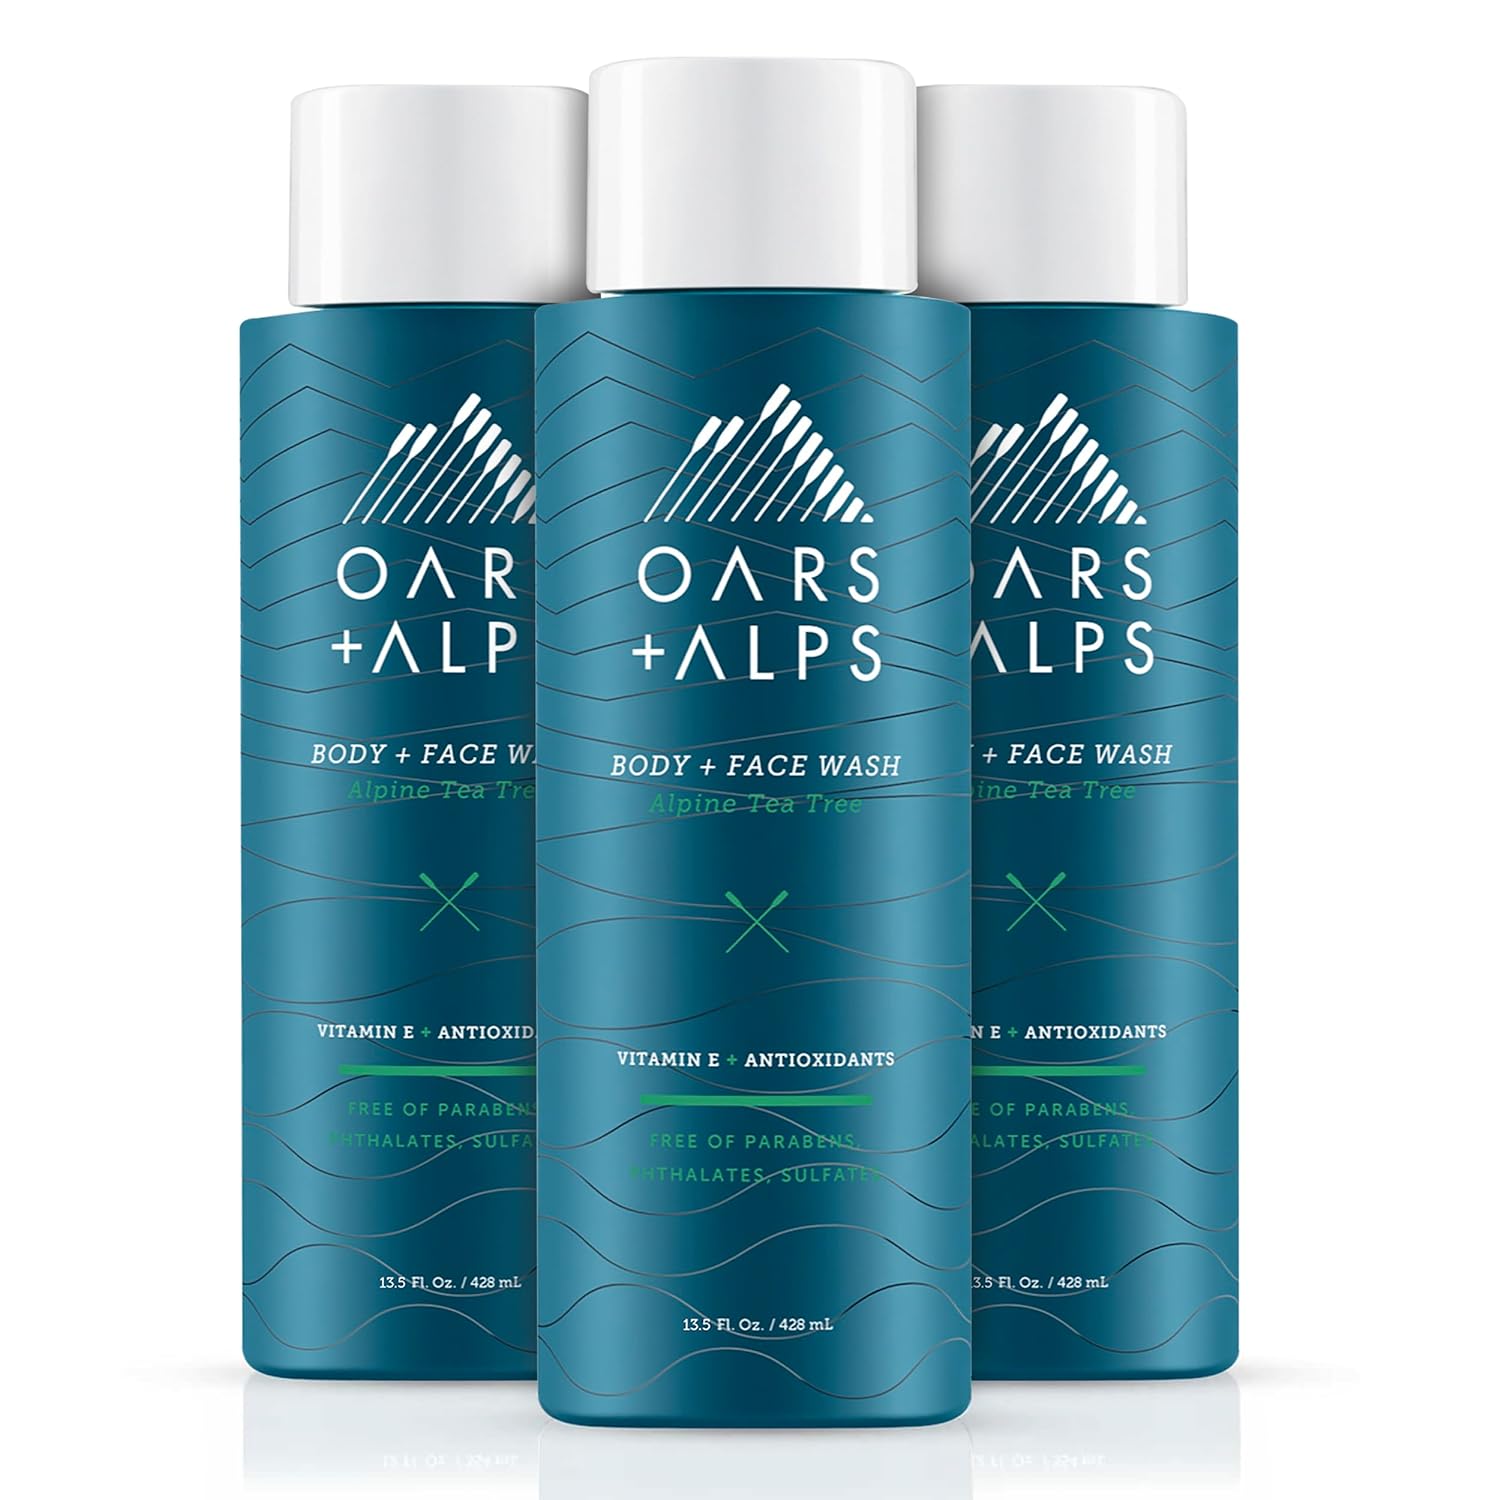 Oars + Alps Men's Moisturizing Body and Face Wash, Skin Care Infused with Vitamin E and Antioxidants, Sulfate Free, Alpine Tea Tree, 3 Pack